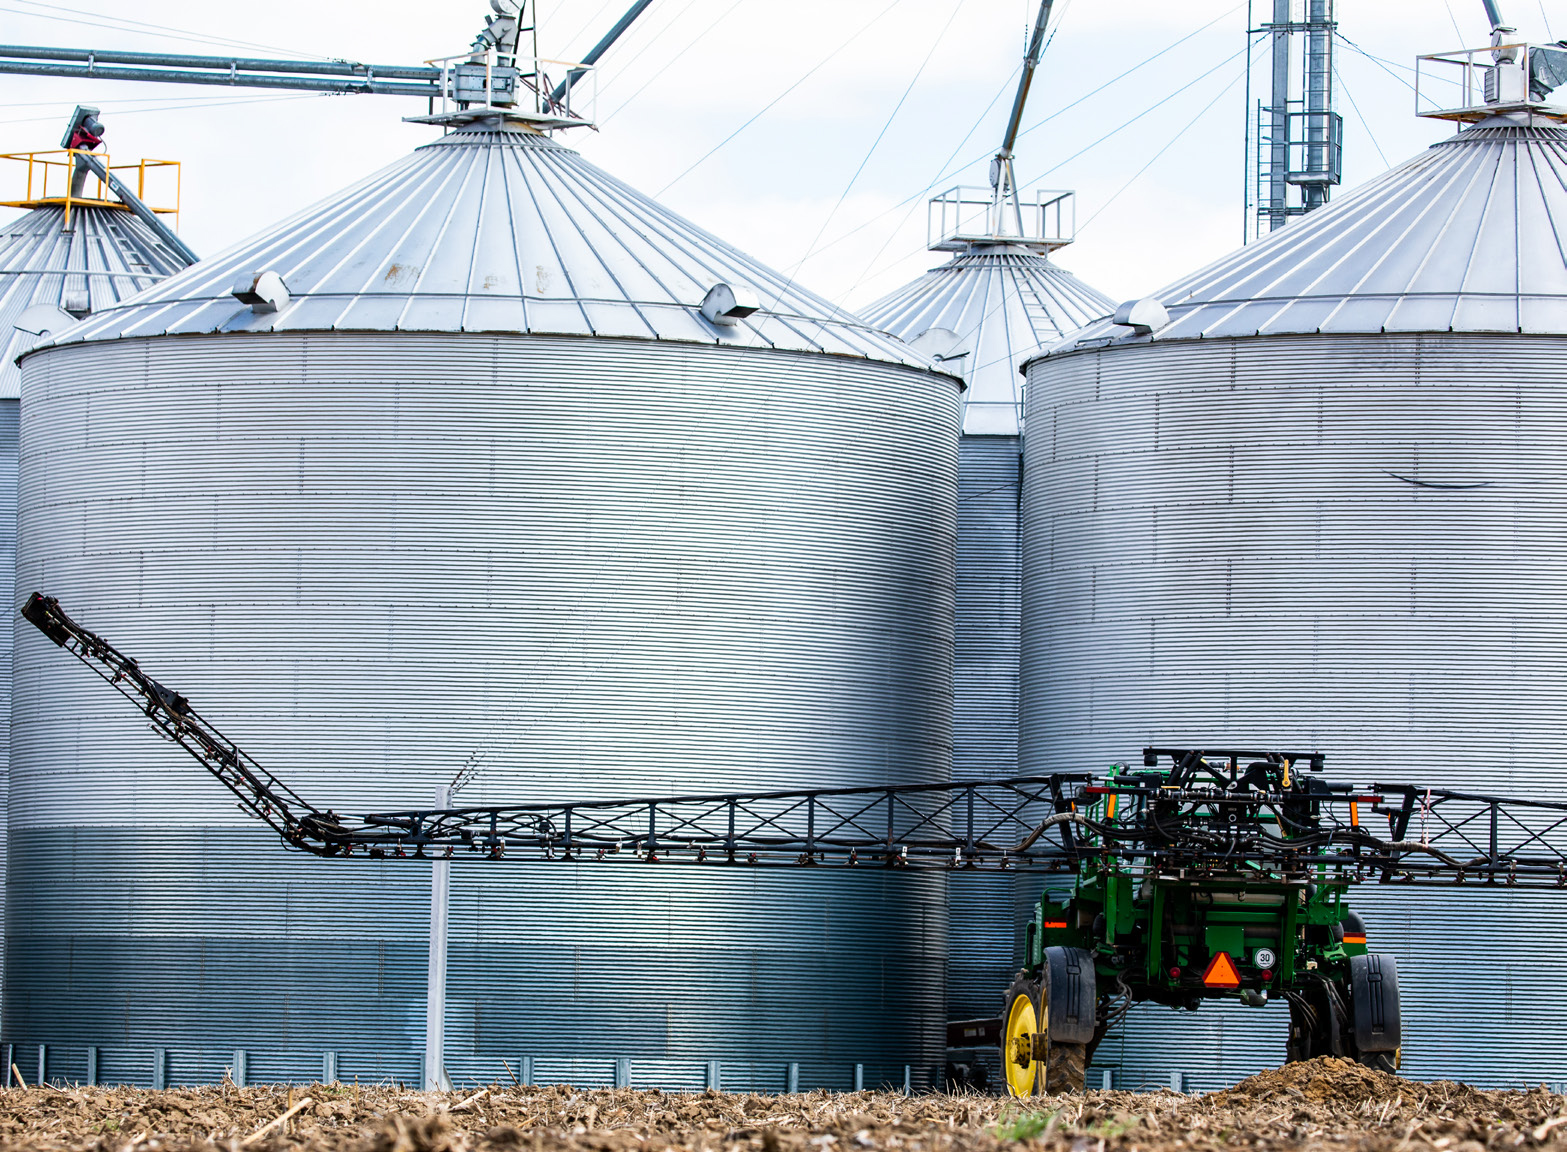 View of tractor next to large grain bins